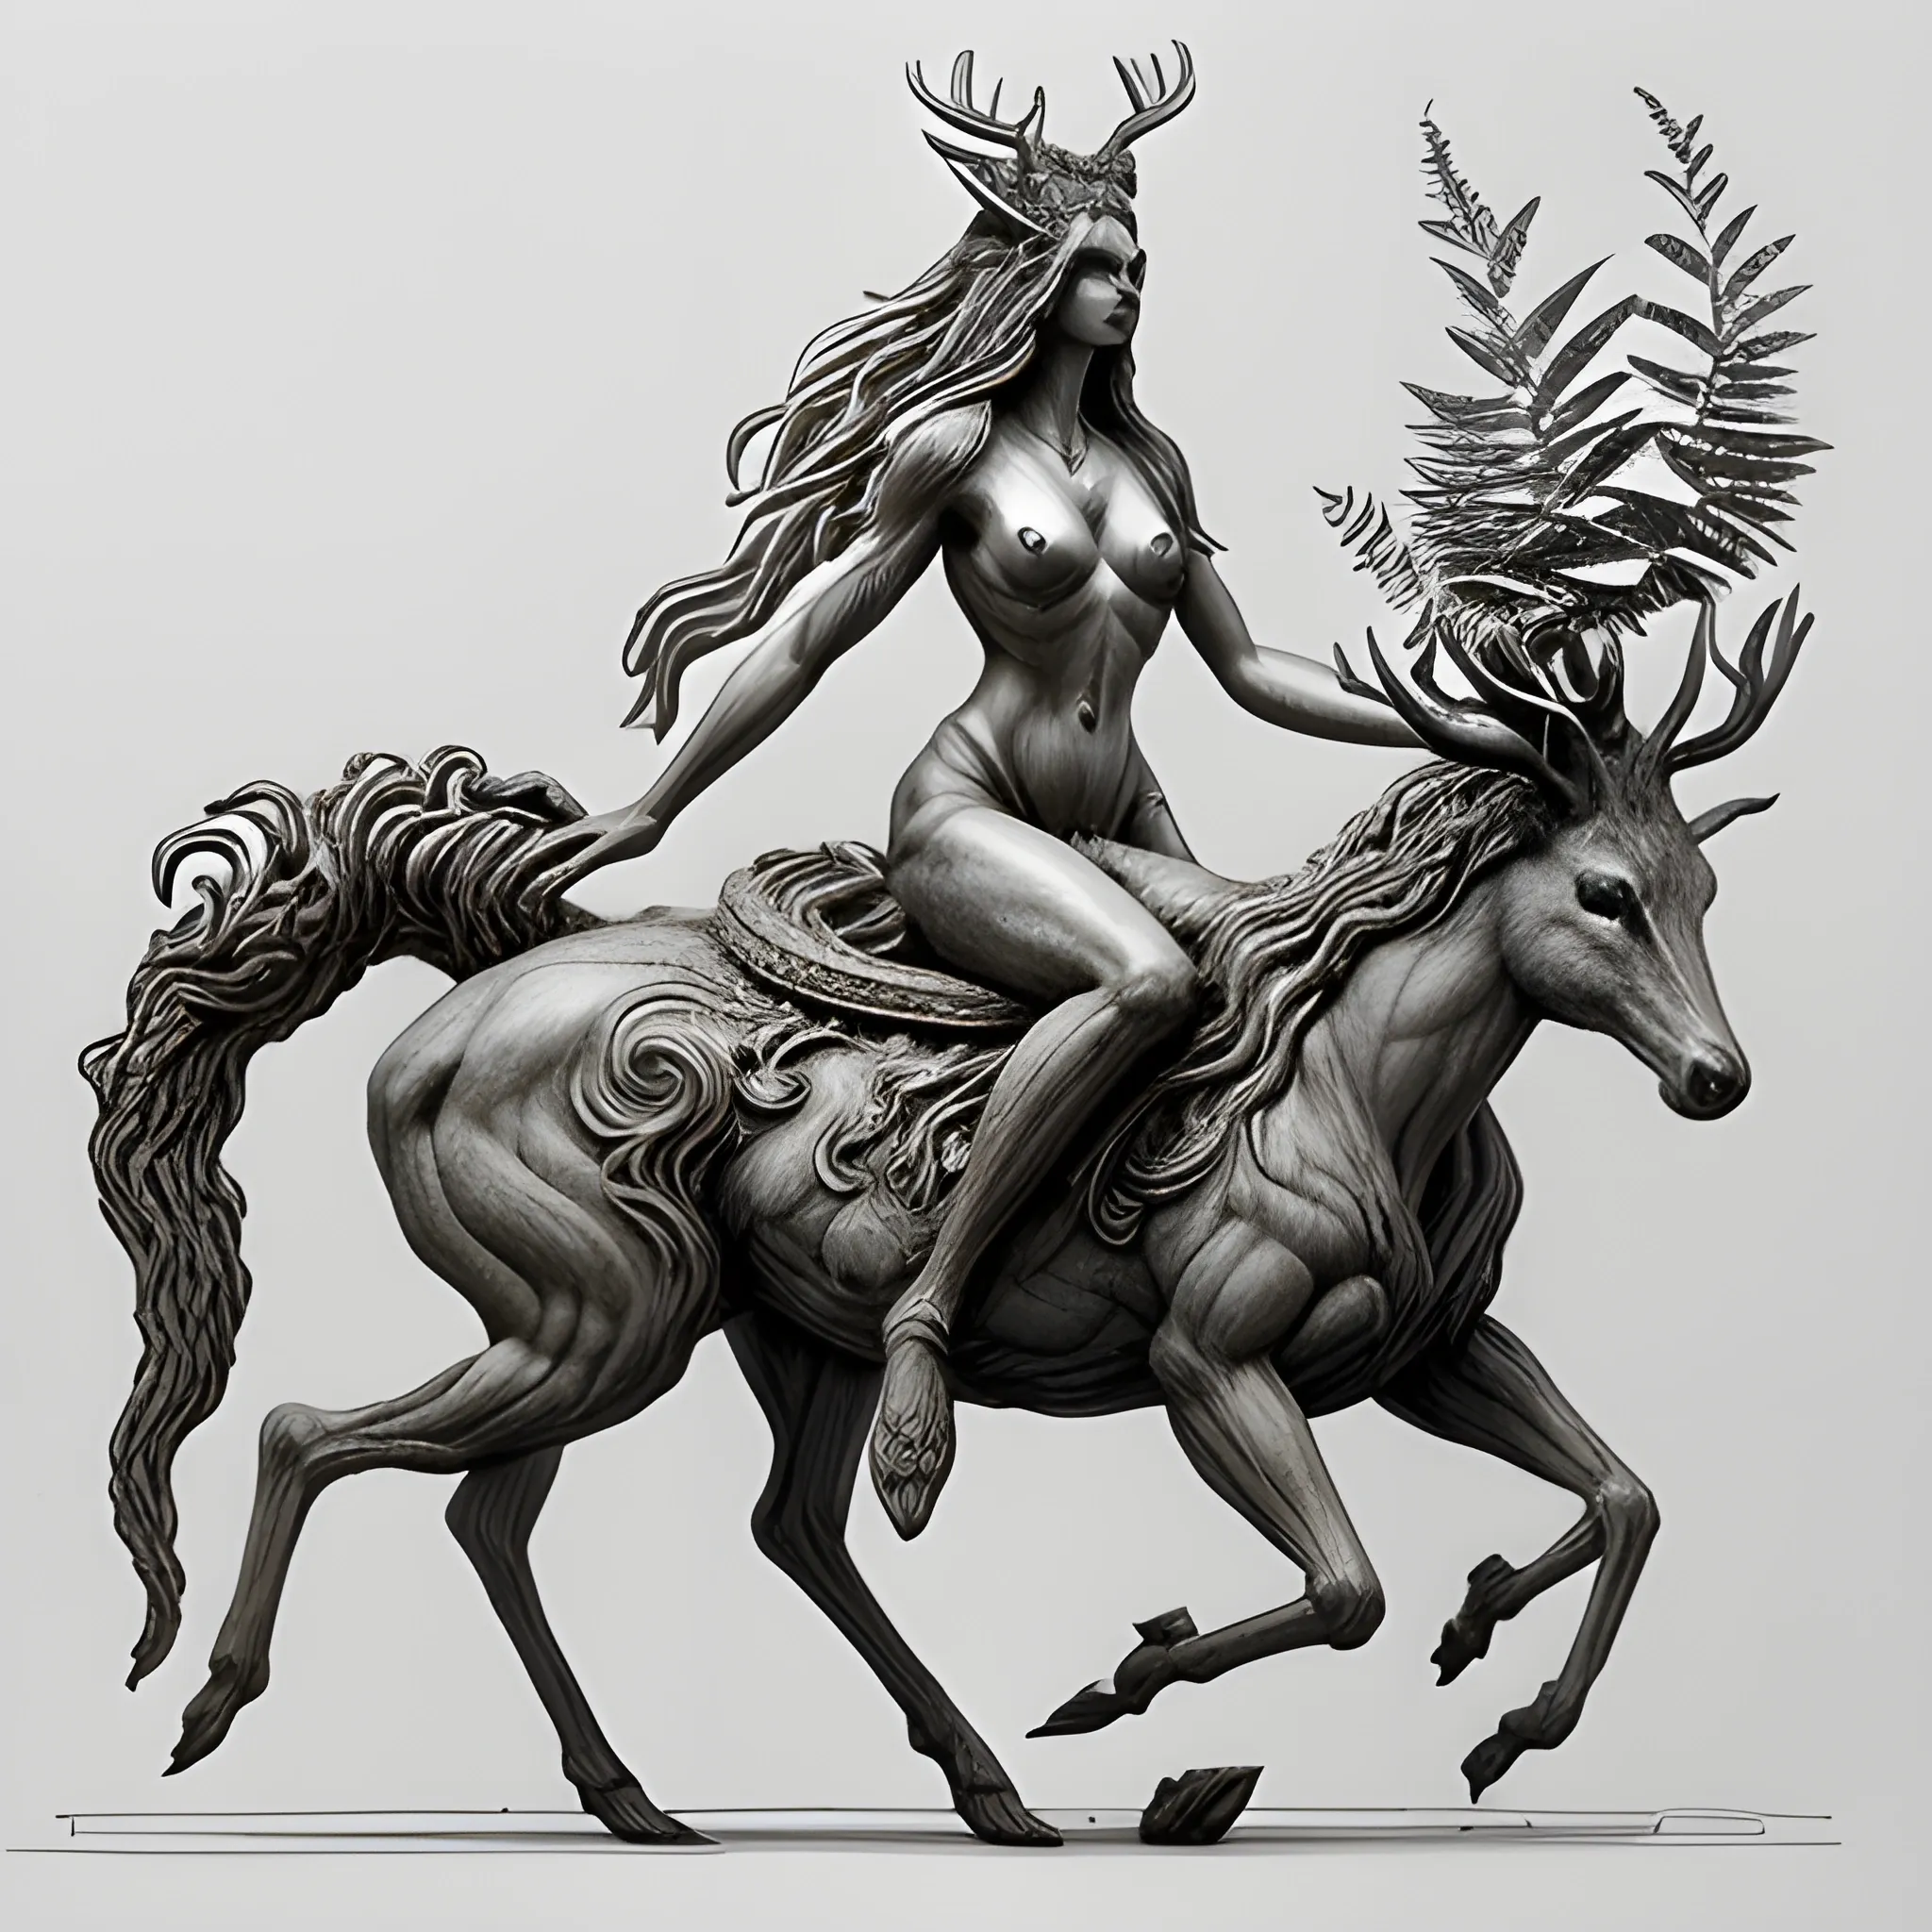 , A nocturnal, forest, hyper-realistic representation of a female goddess of deer and plants, riding a creature that fuses a cat with a horse, created by a prodigious sculptor from the future, Pencil Sketch